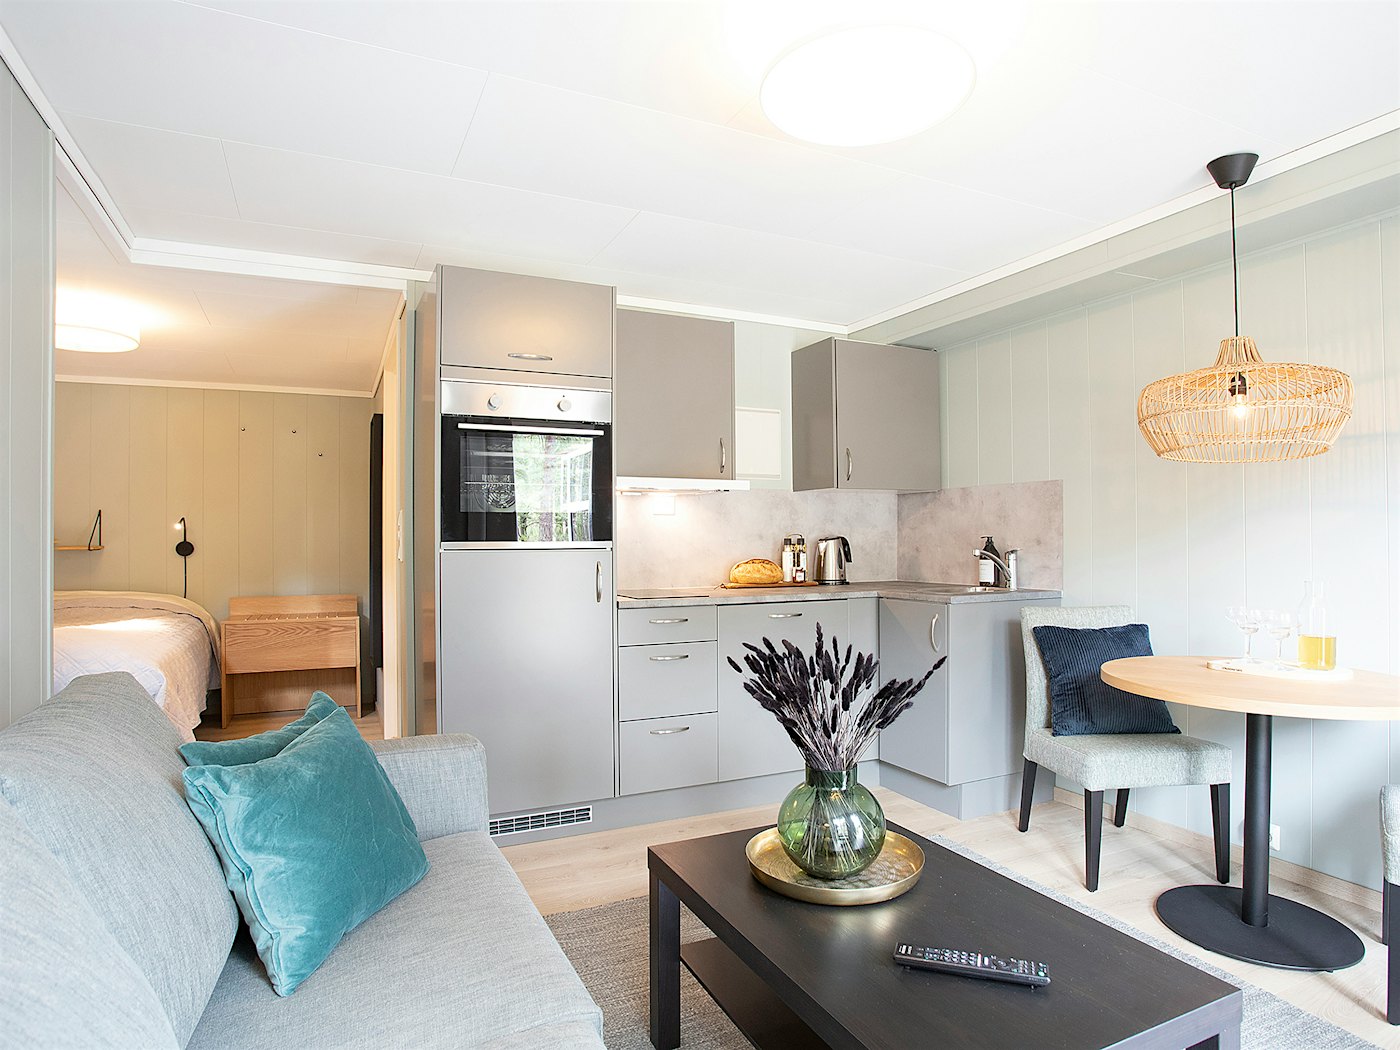 Bright and modern studio apartment with kitchenette, dining table, sofa and coffee table. Double bed in the background. Photo